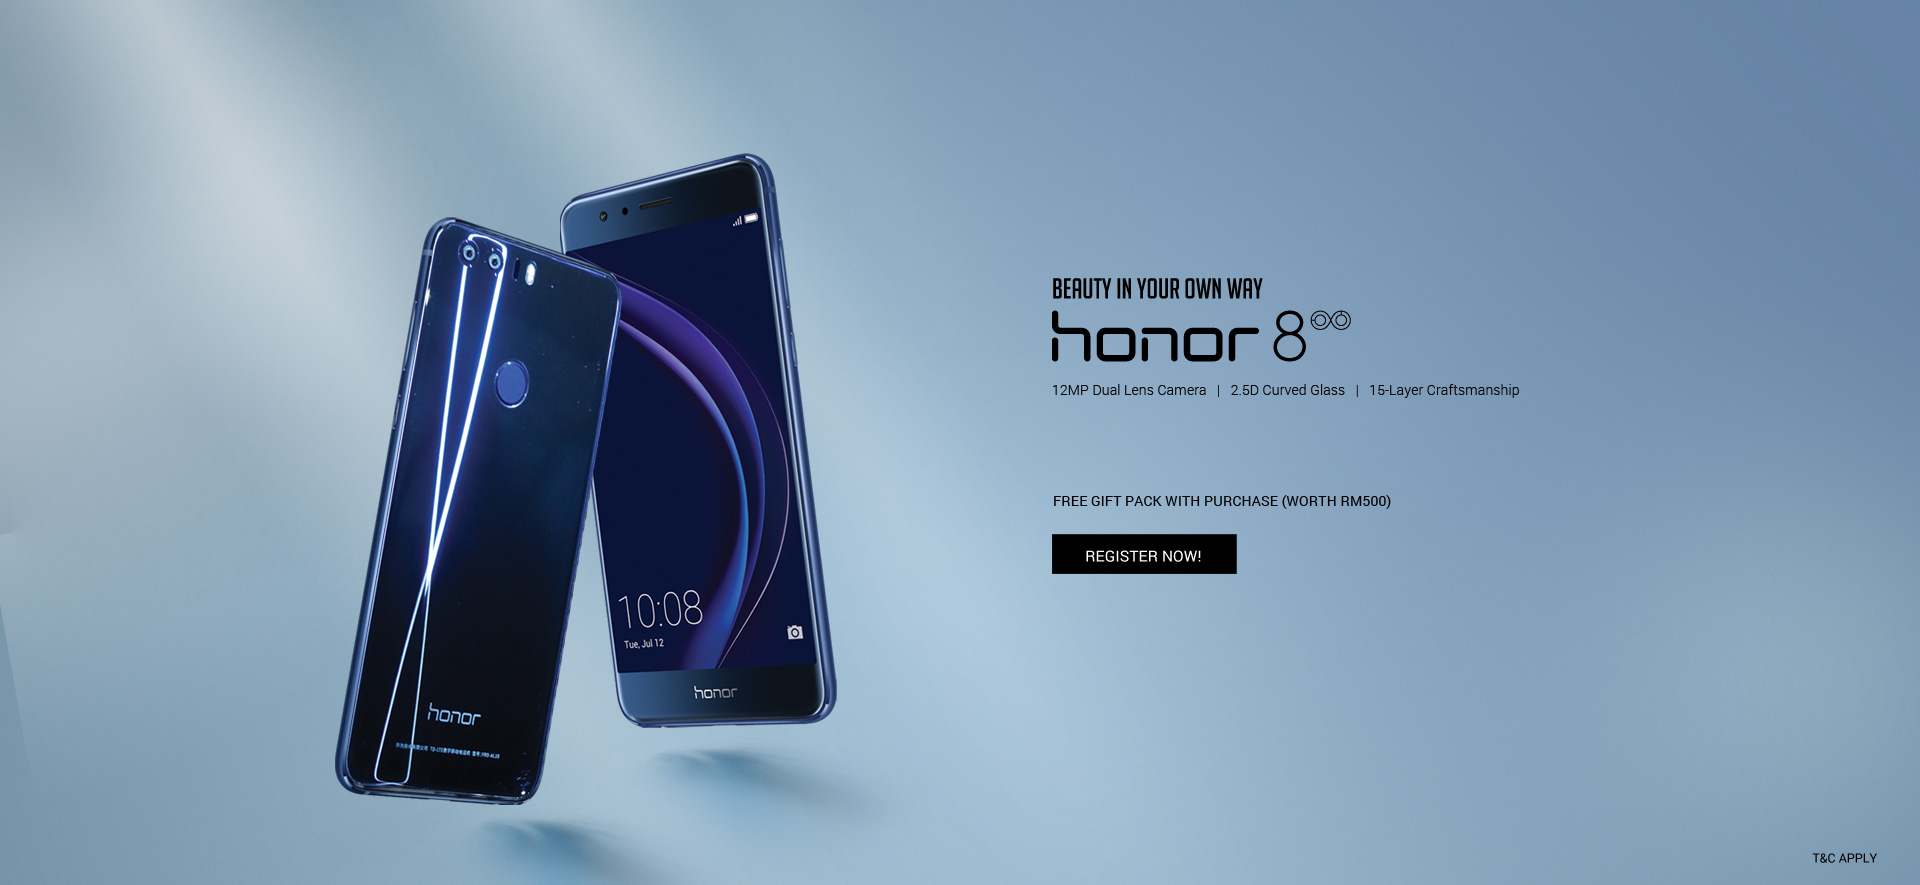 Get Your Honor 8 On The 8th!